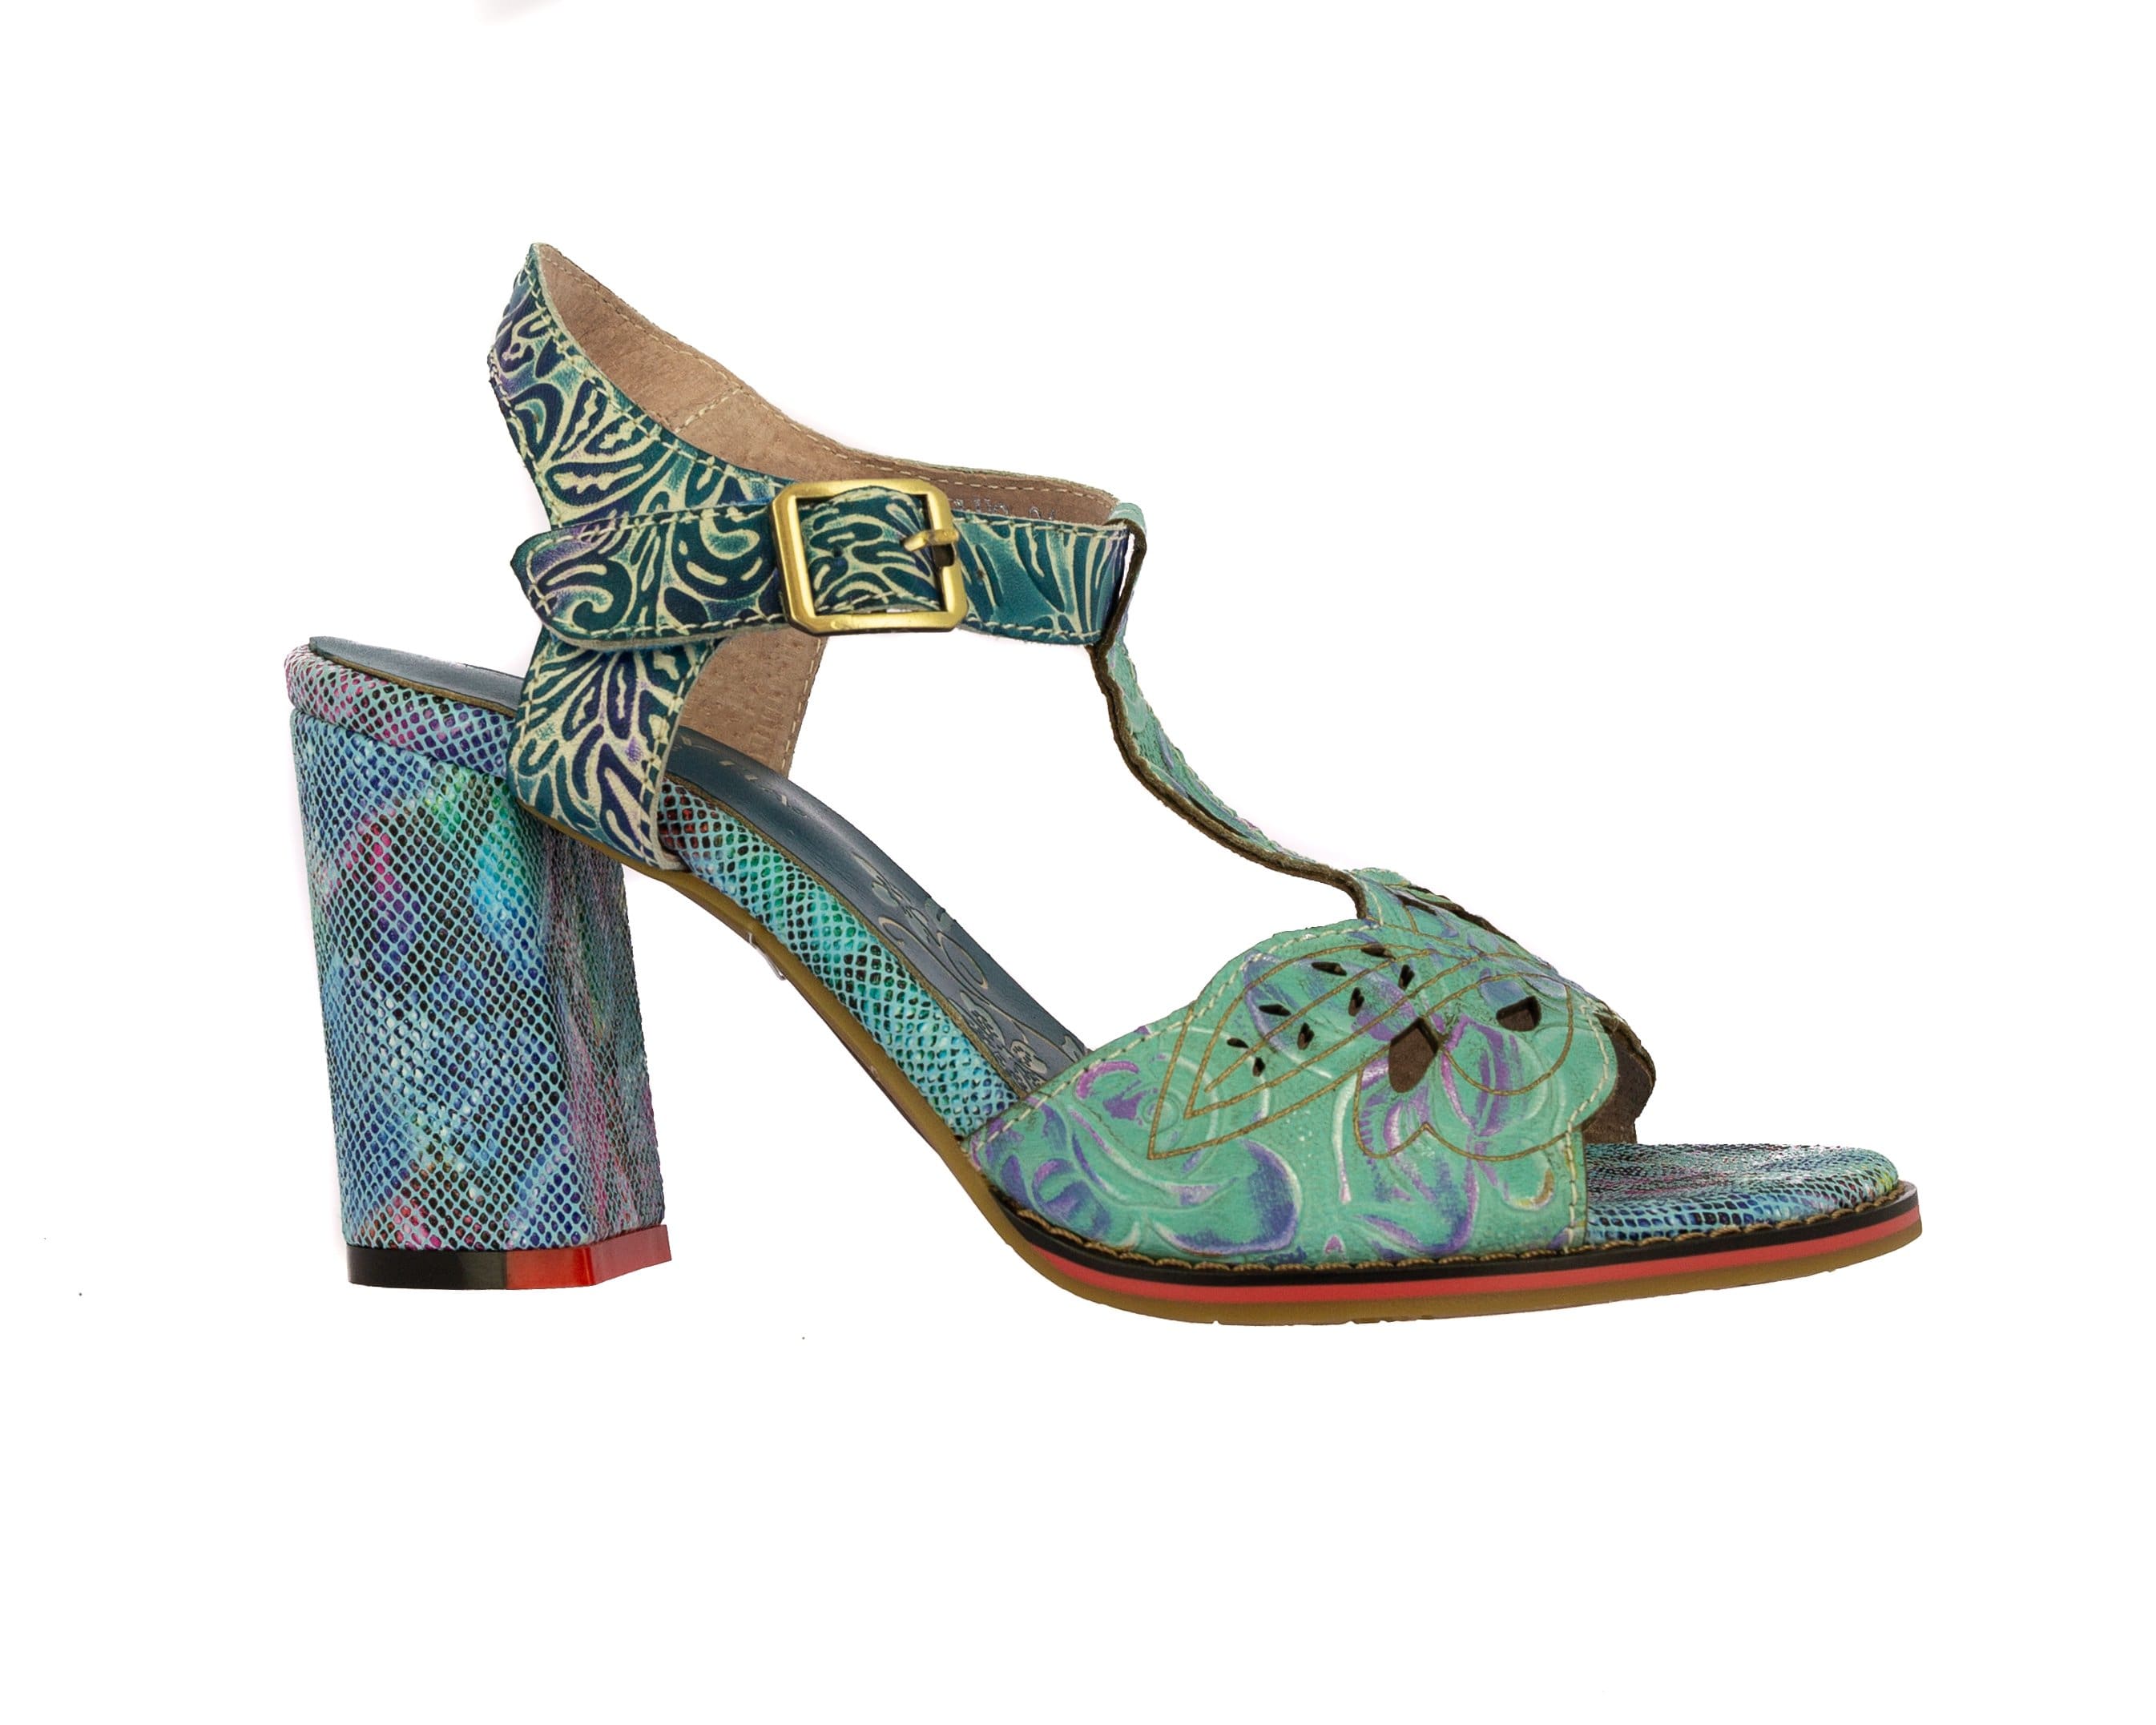 HACLUO 01 shoes - 35 / TURQUOISE - Sandal